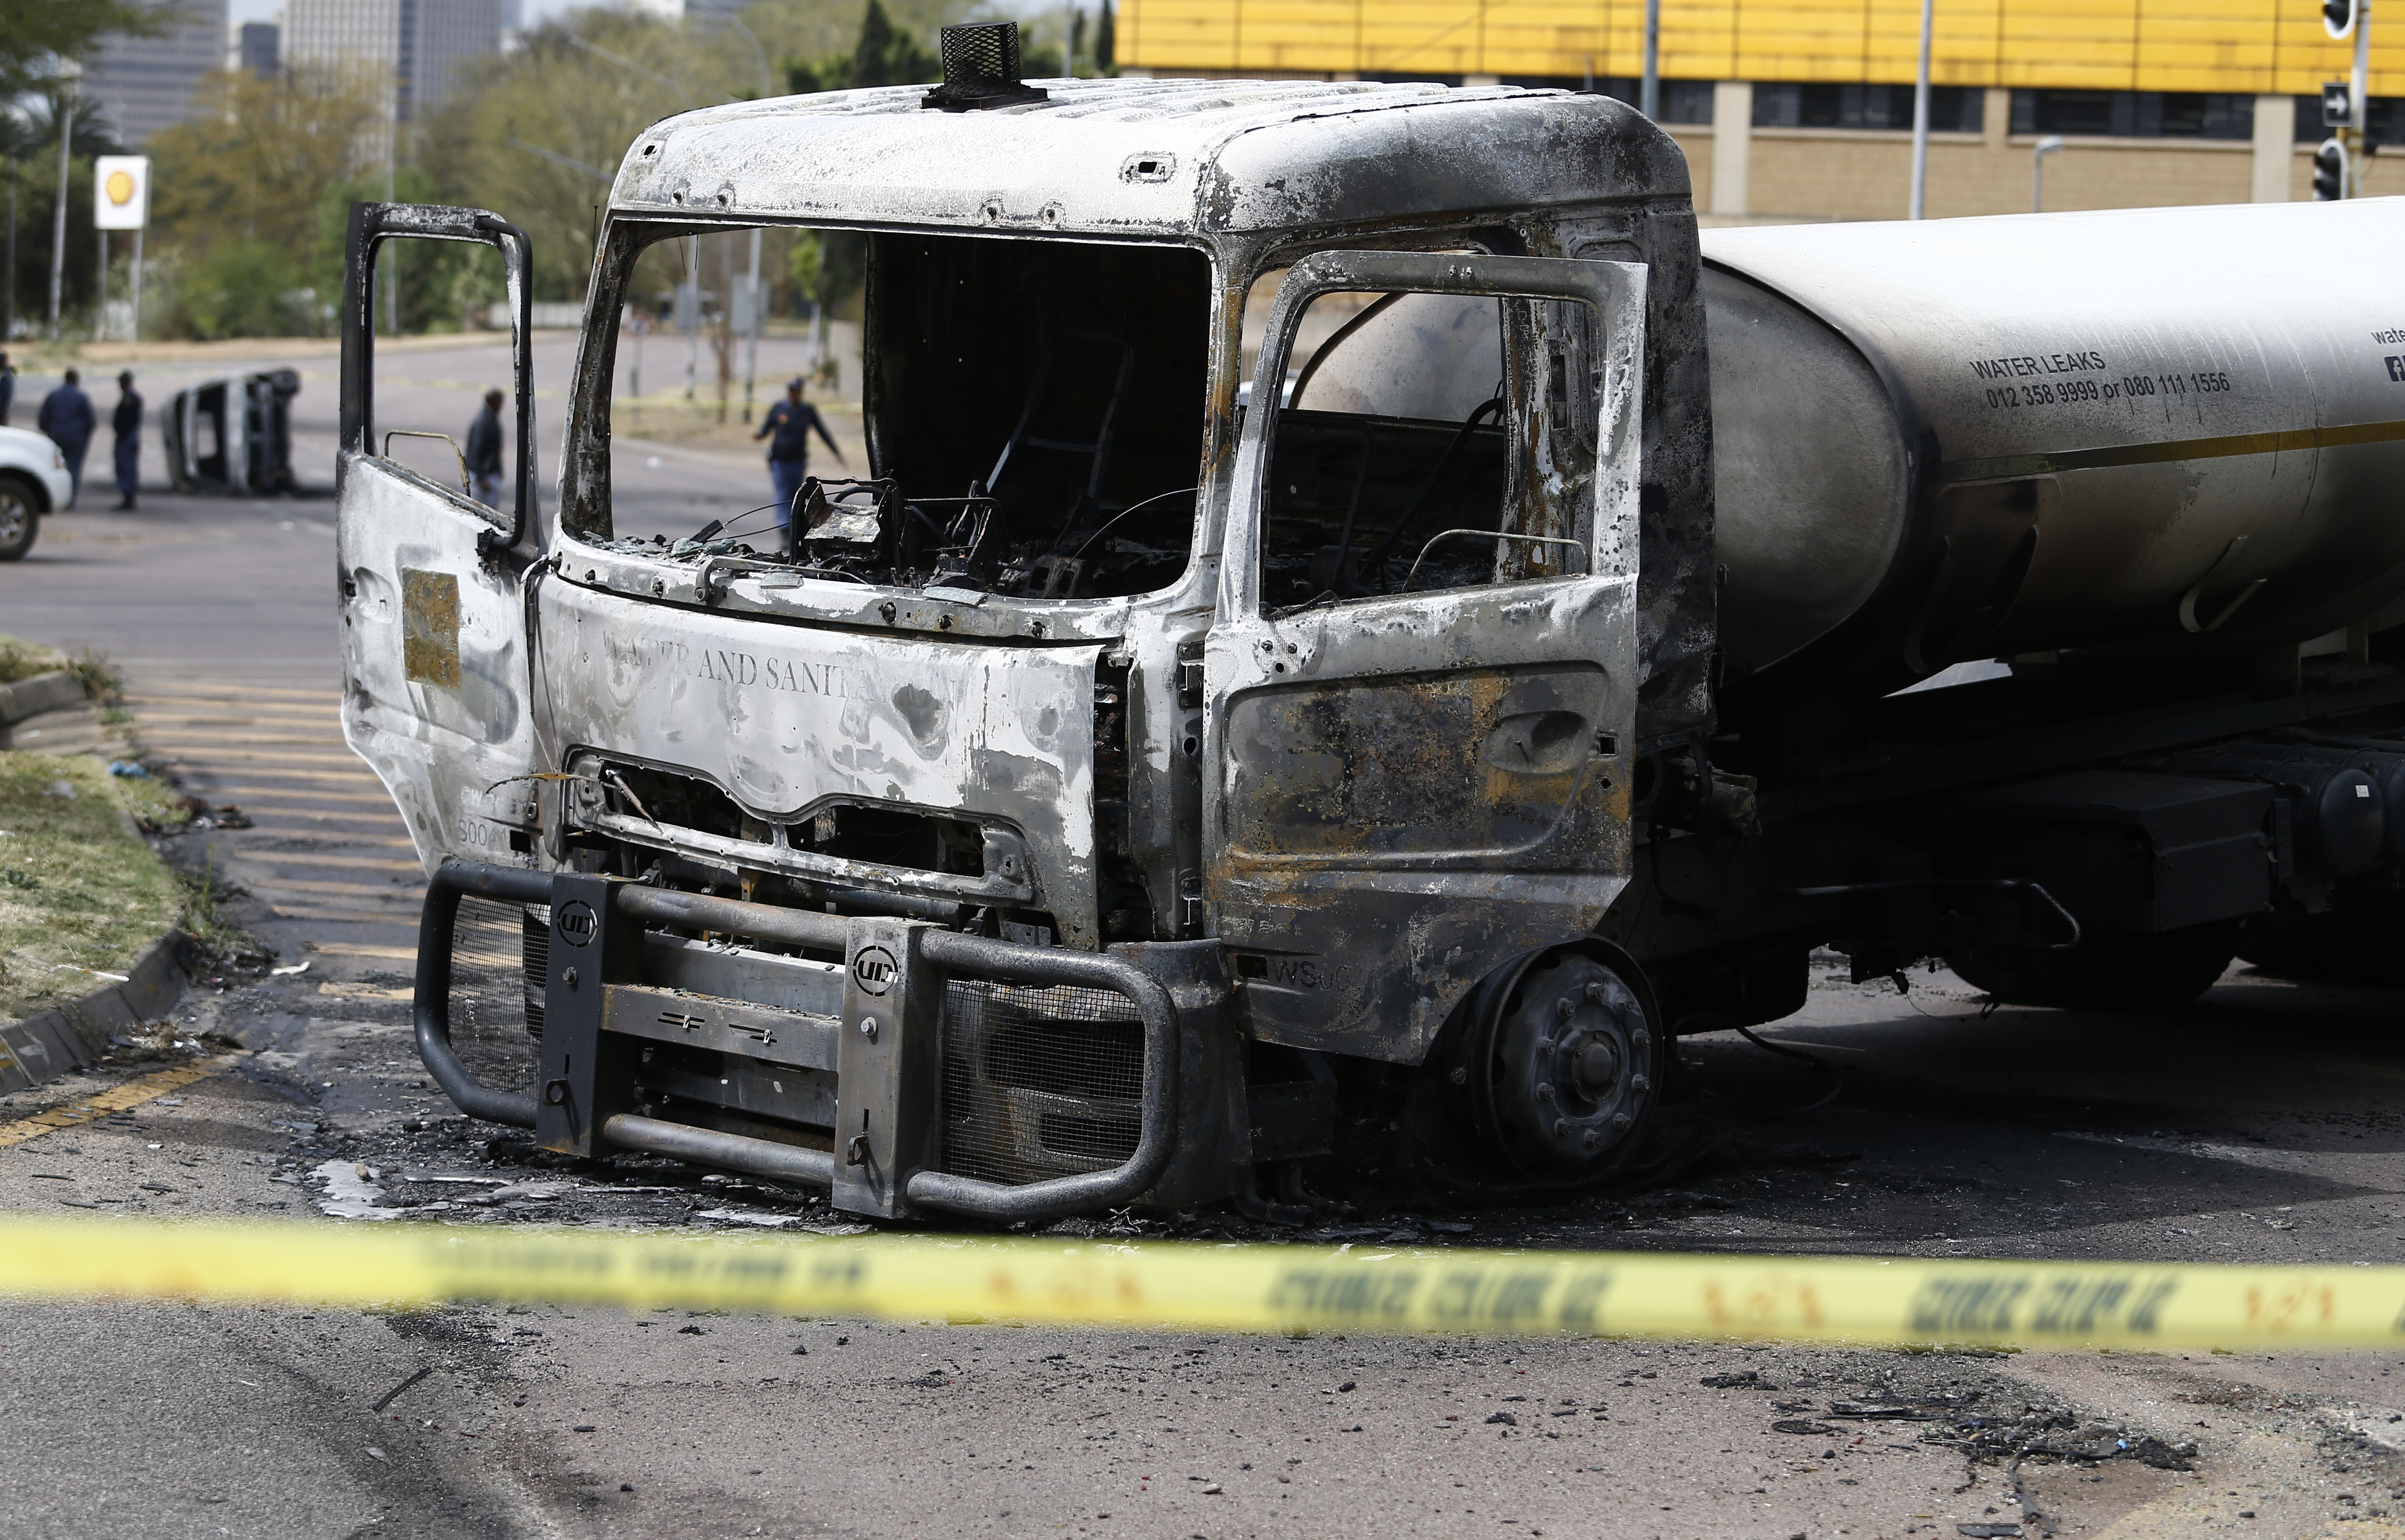 Torched City of Tshwane vehicles